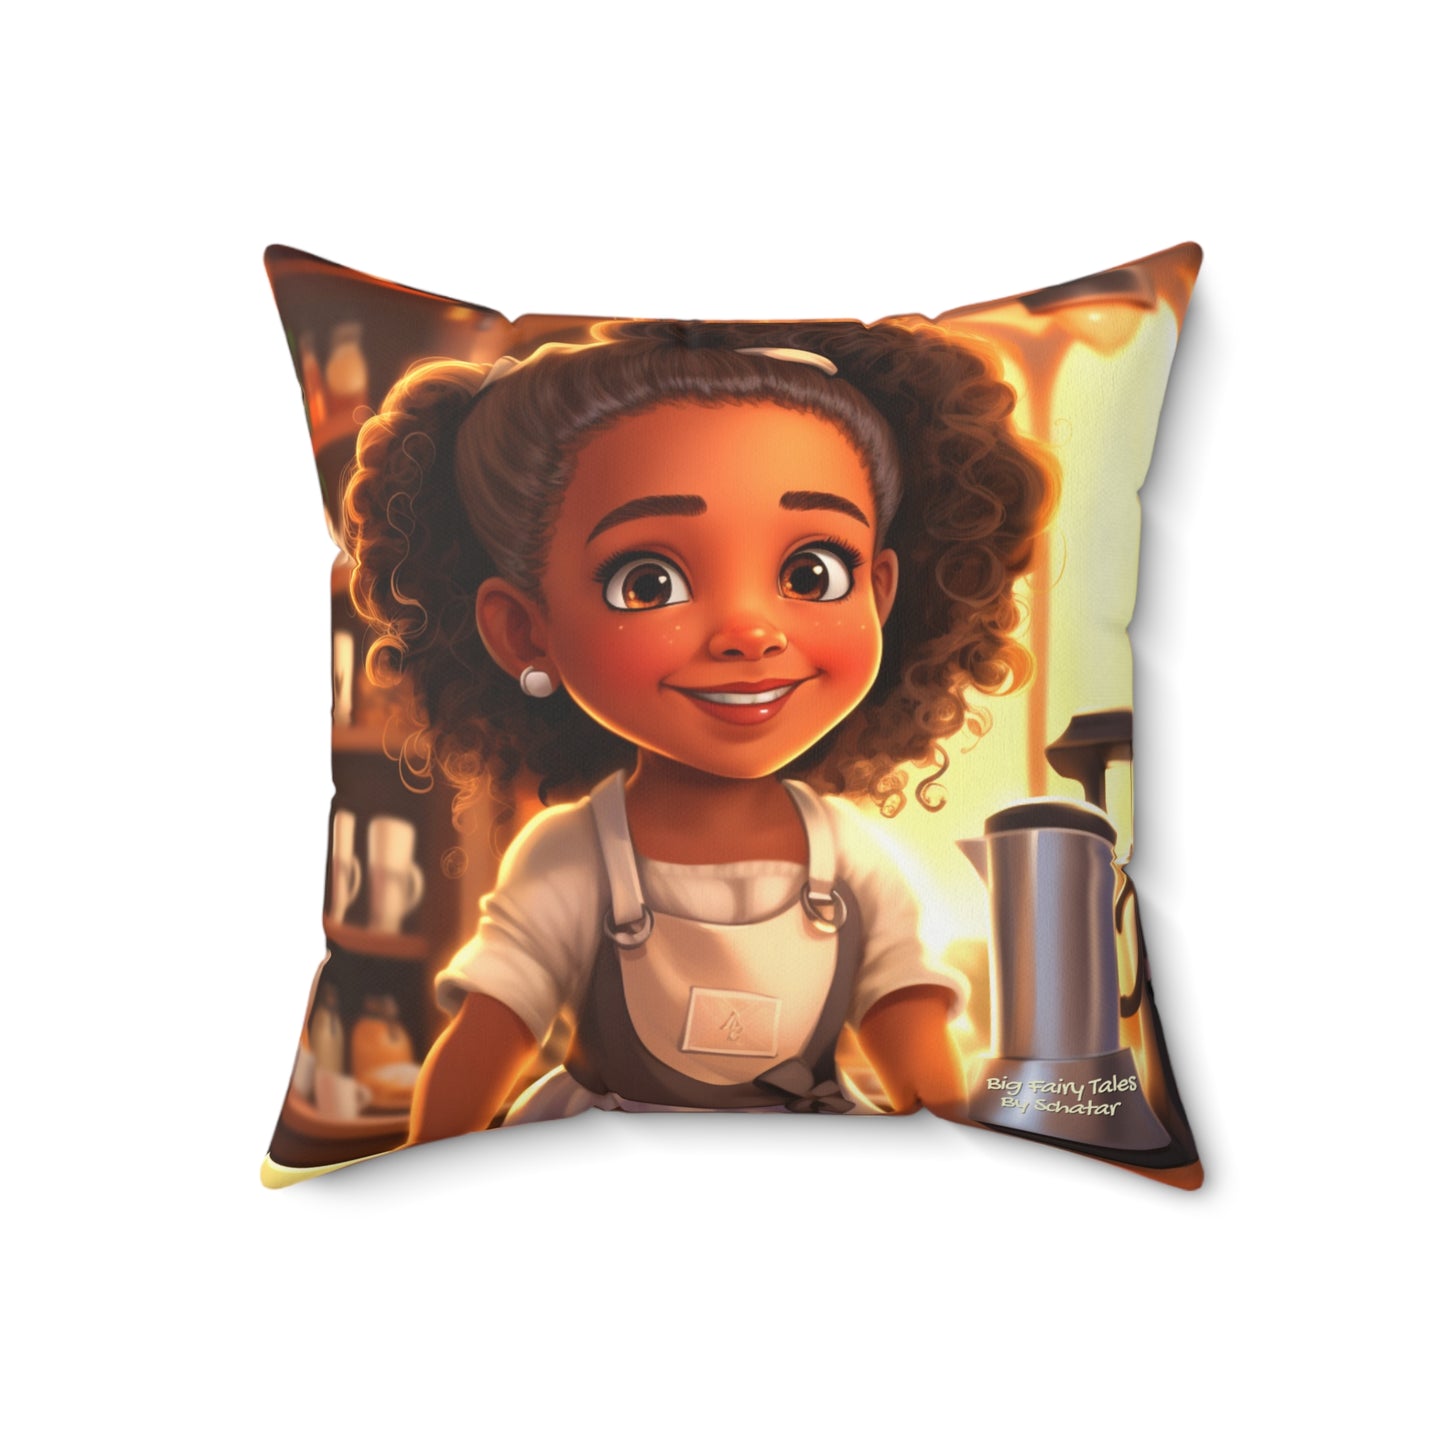 Coffee Shop Owner - Big Little Professionals Plush Pillow 15 From Big Fairy Tales By Schatar